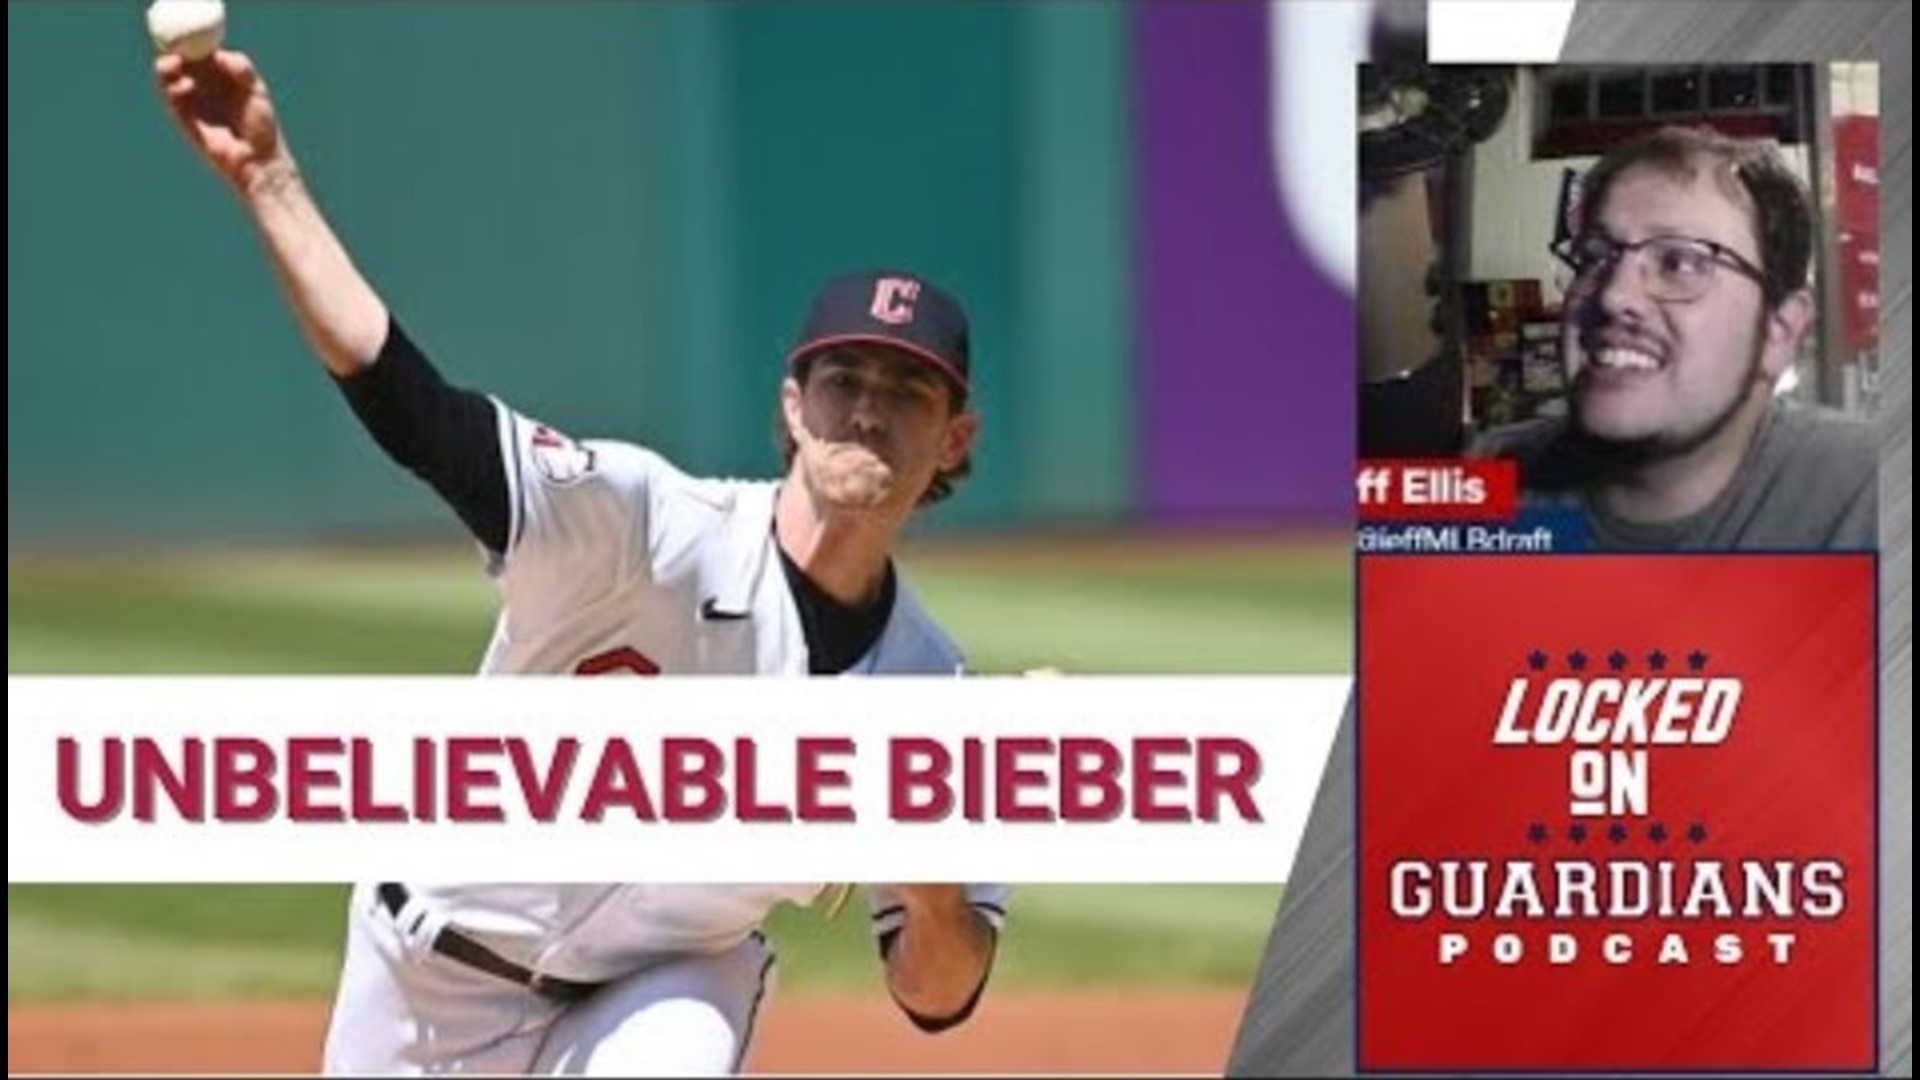 The Cleveland Guardians continue their winning ways against the Kansas City Royals as Shane Bieber continues to dominate.